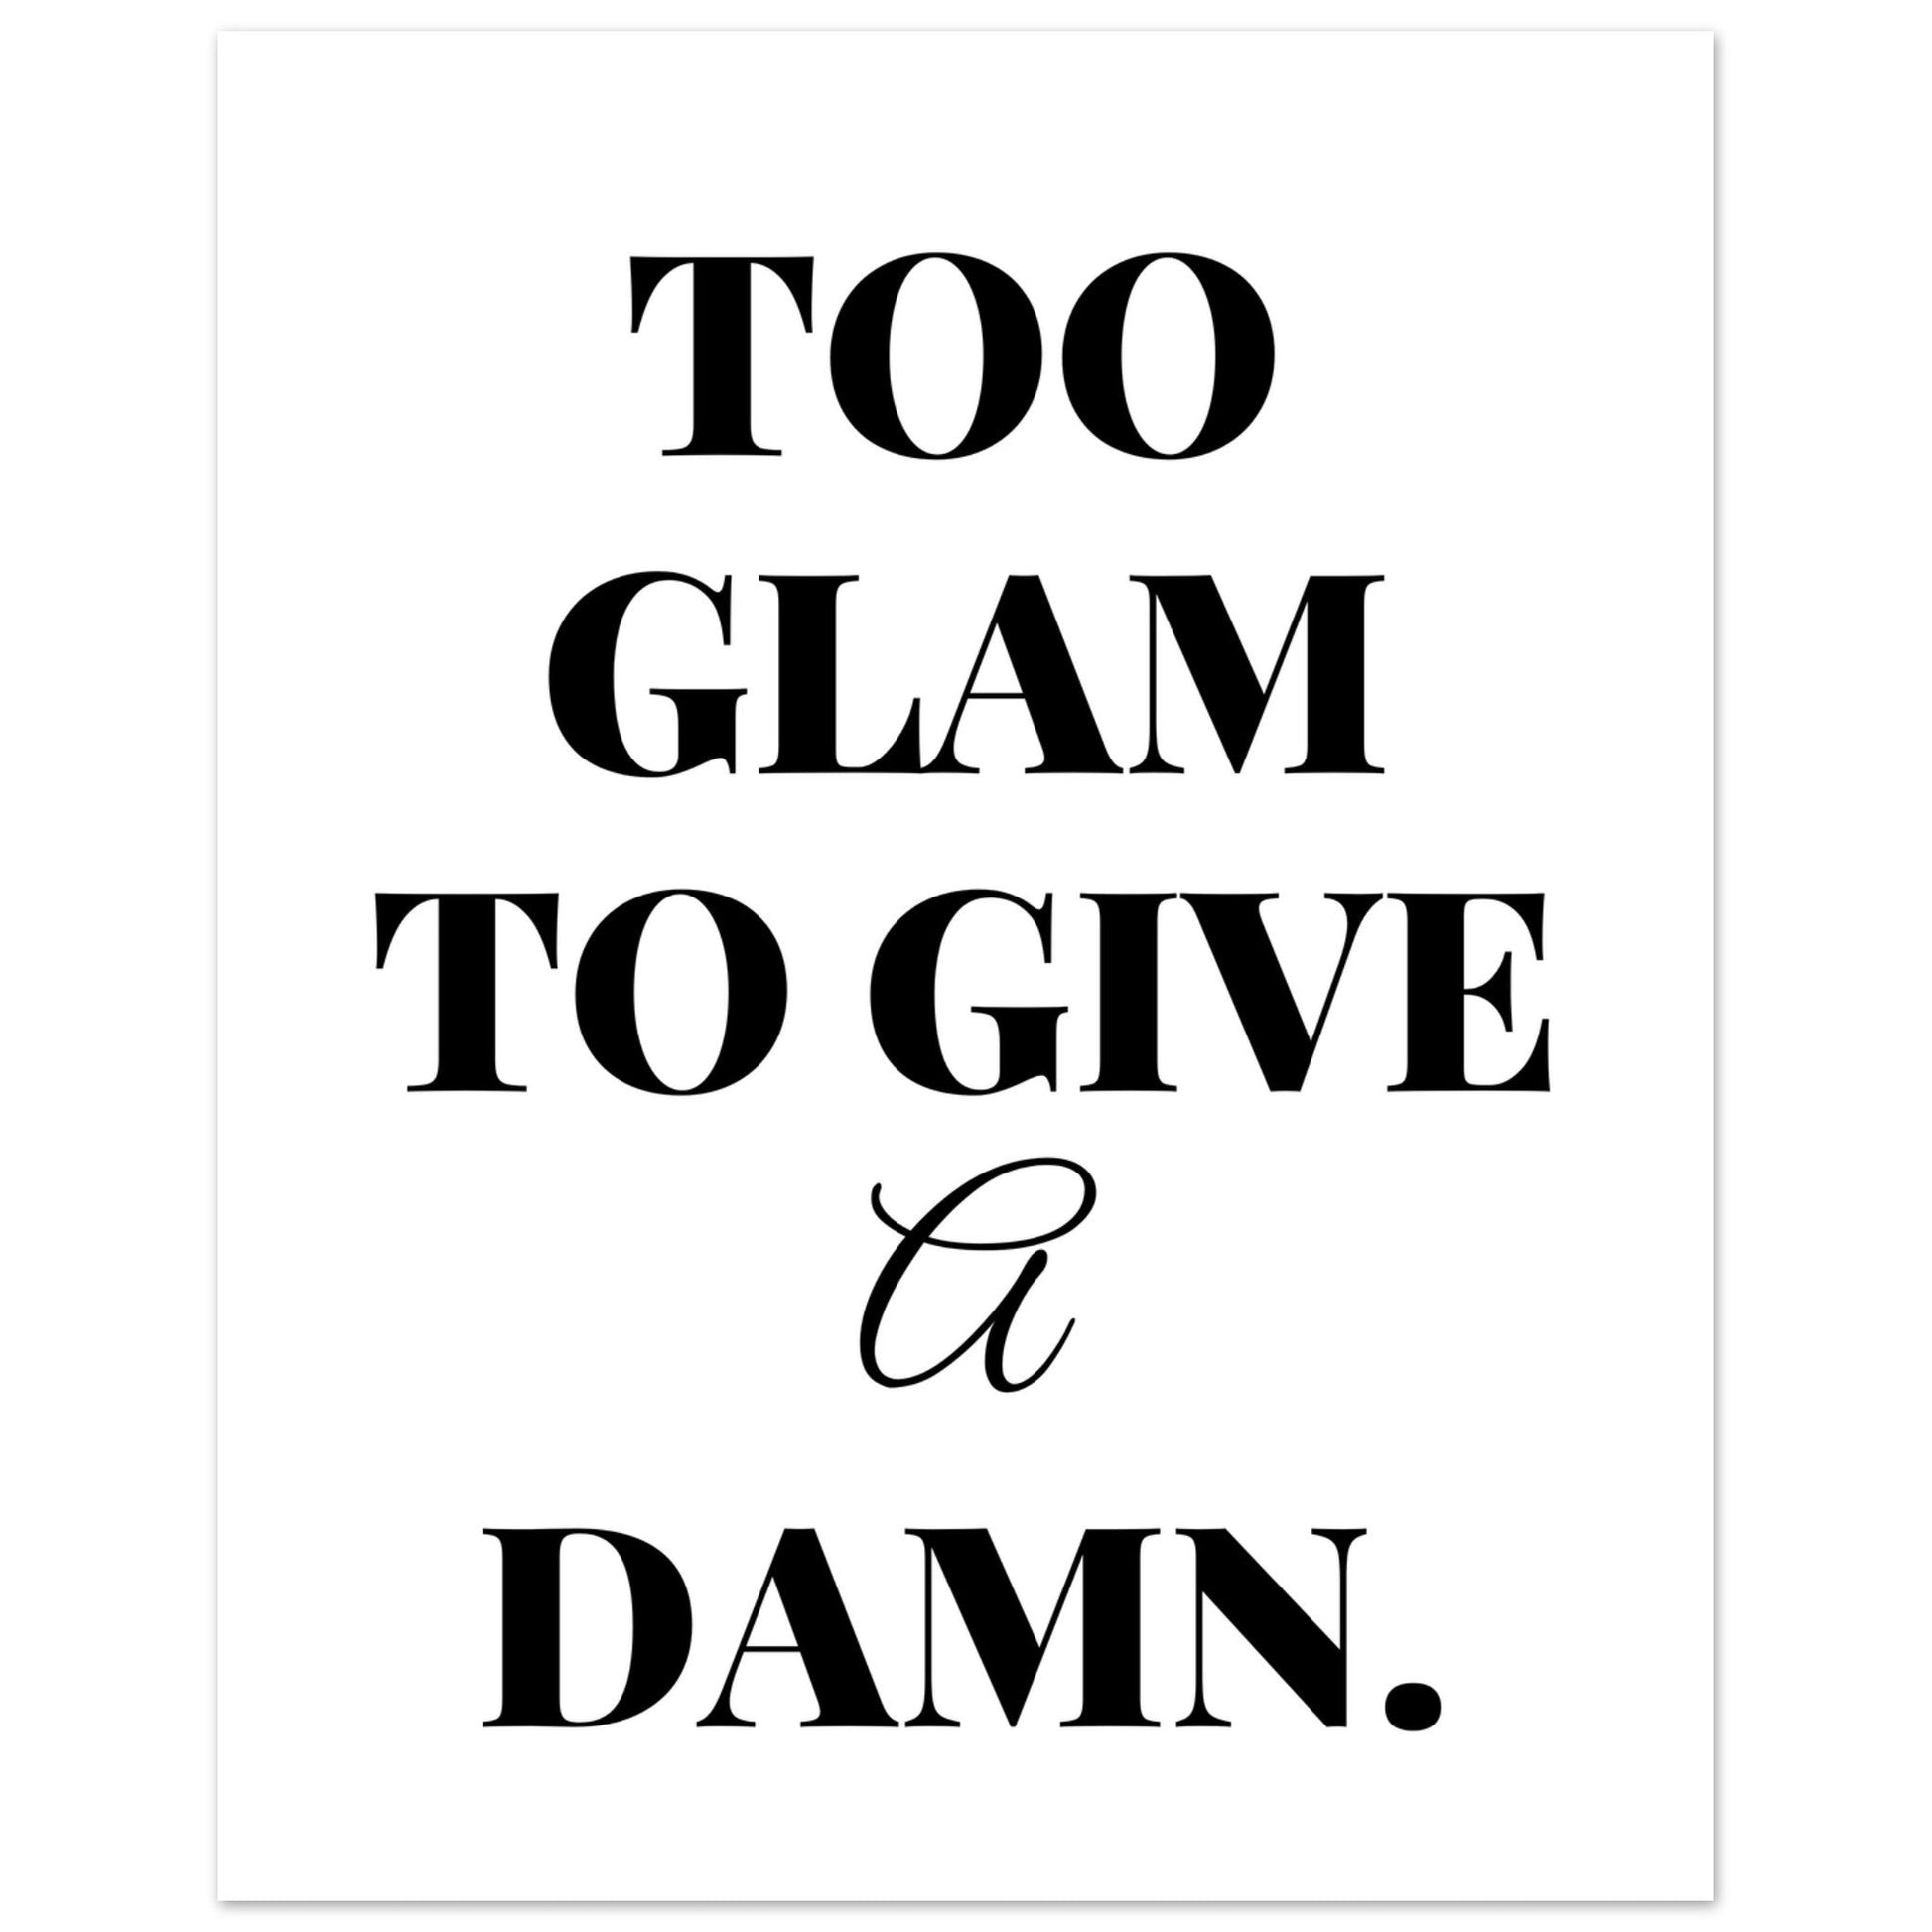 Too Glam To Give A Damn, Black and white, Too Glam To Give A Damn, Typography, #illieeart #